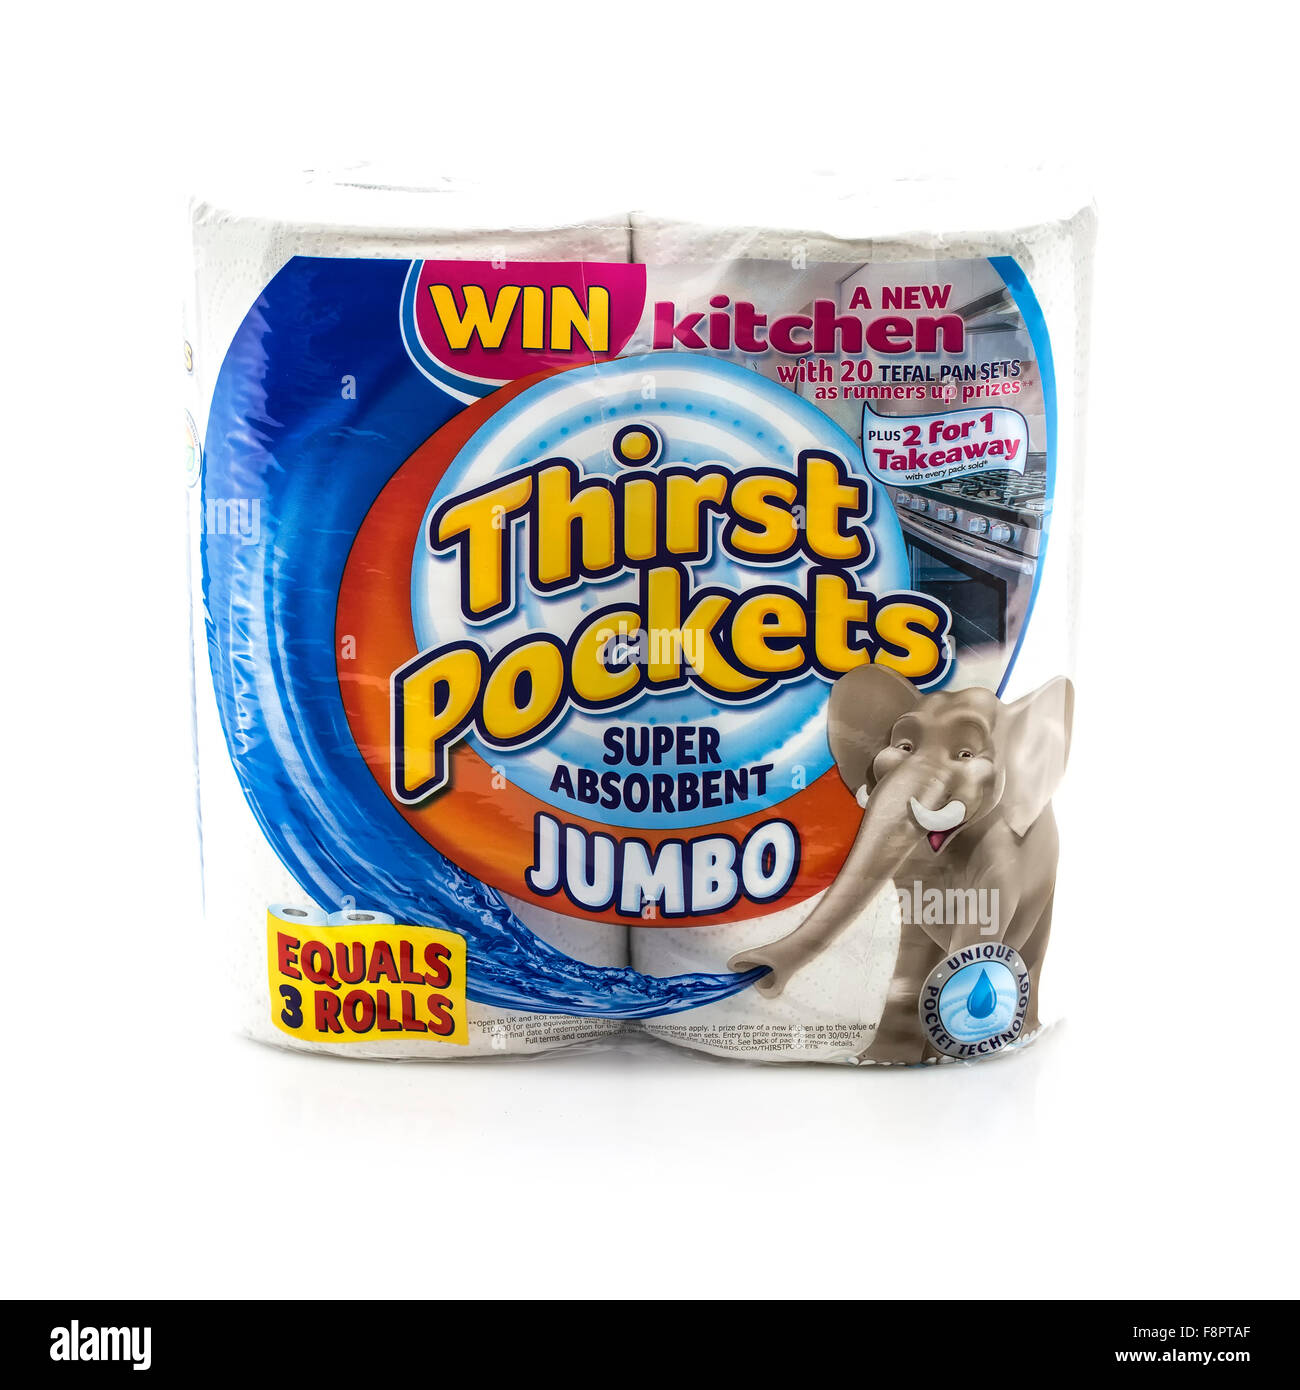 Pack Of Jumbo Thirst Pockets Kitchen Roll on a White Background Stock Photo